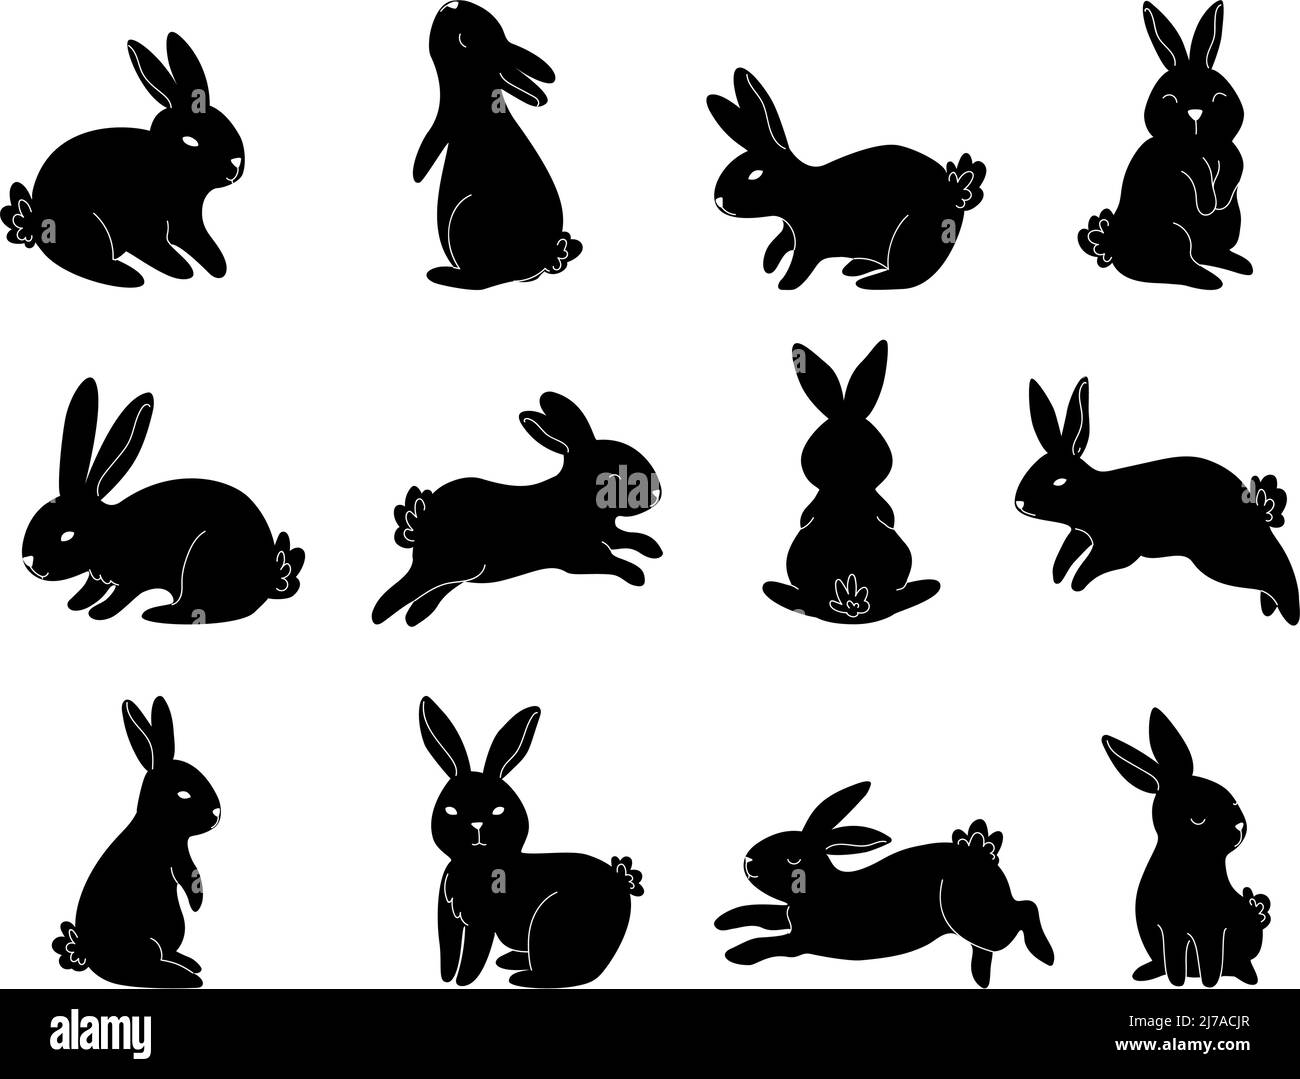 Black rabbit silhouette. Sitting bunny, cute jumping rabbits and contour animals vector set Stock Vector